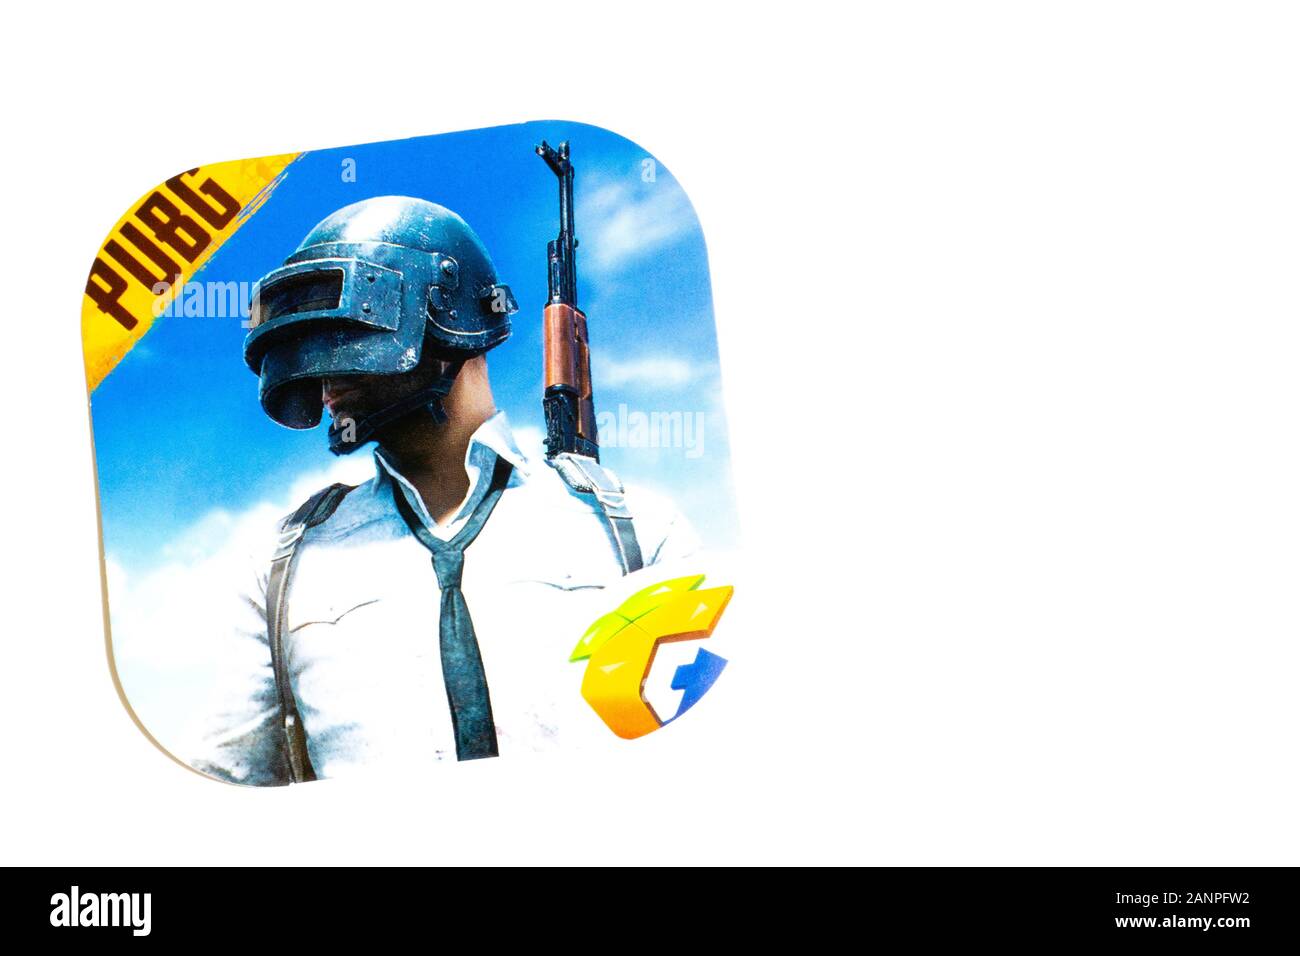 Los Angeles, California, USA - 17 January 2020: PUBG mobile phone game app logo on background with copy space, Illustrative Editorial Stock Photo